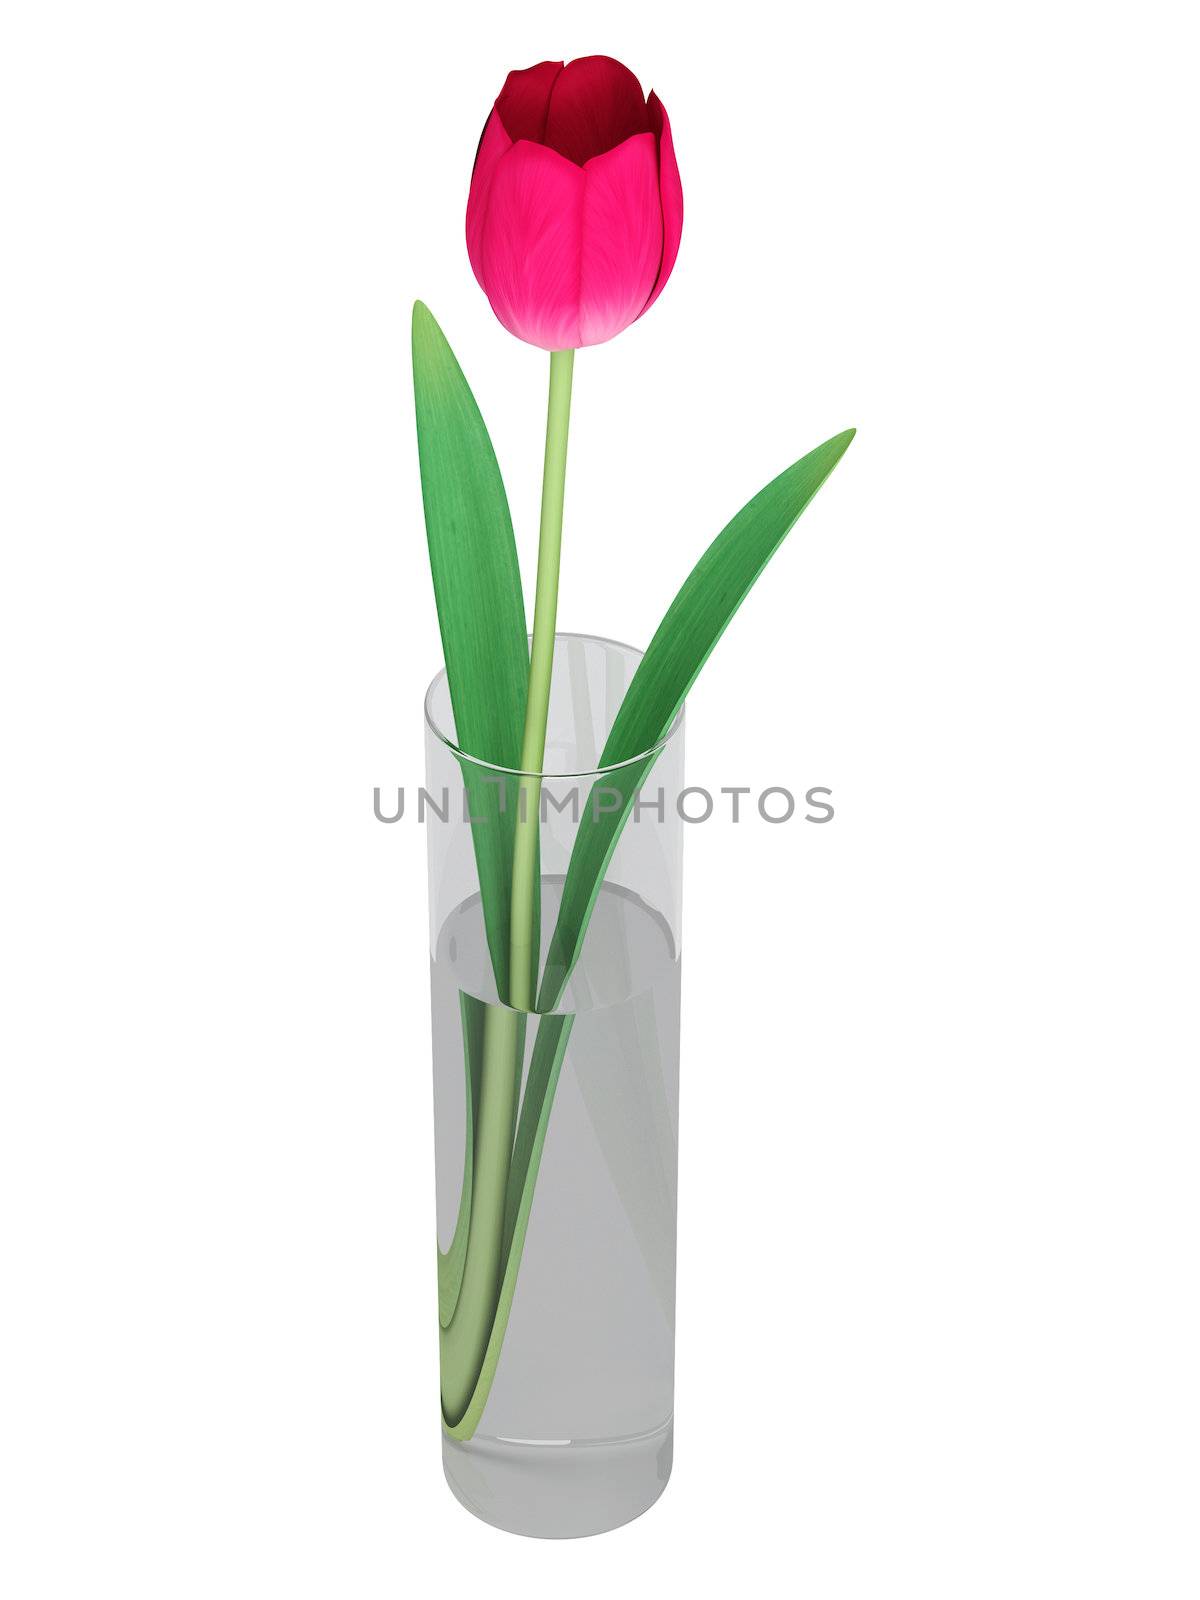 Single perfect pink cut tulip in a glass vase for indoor decoration isolated on white